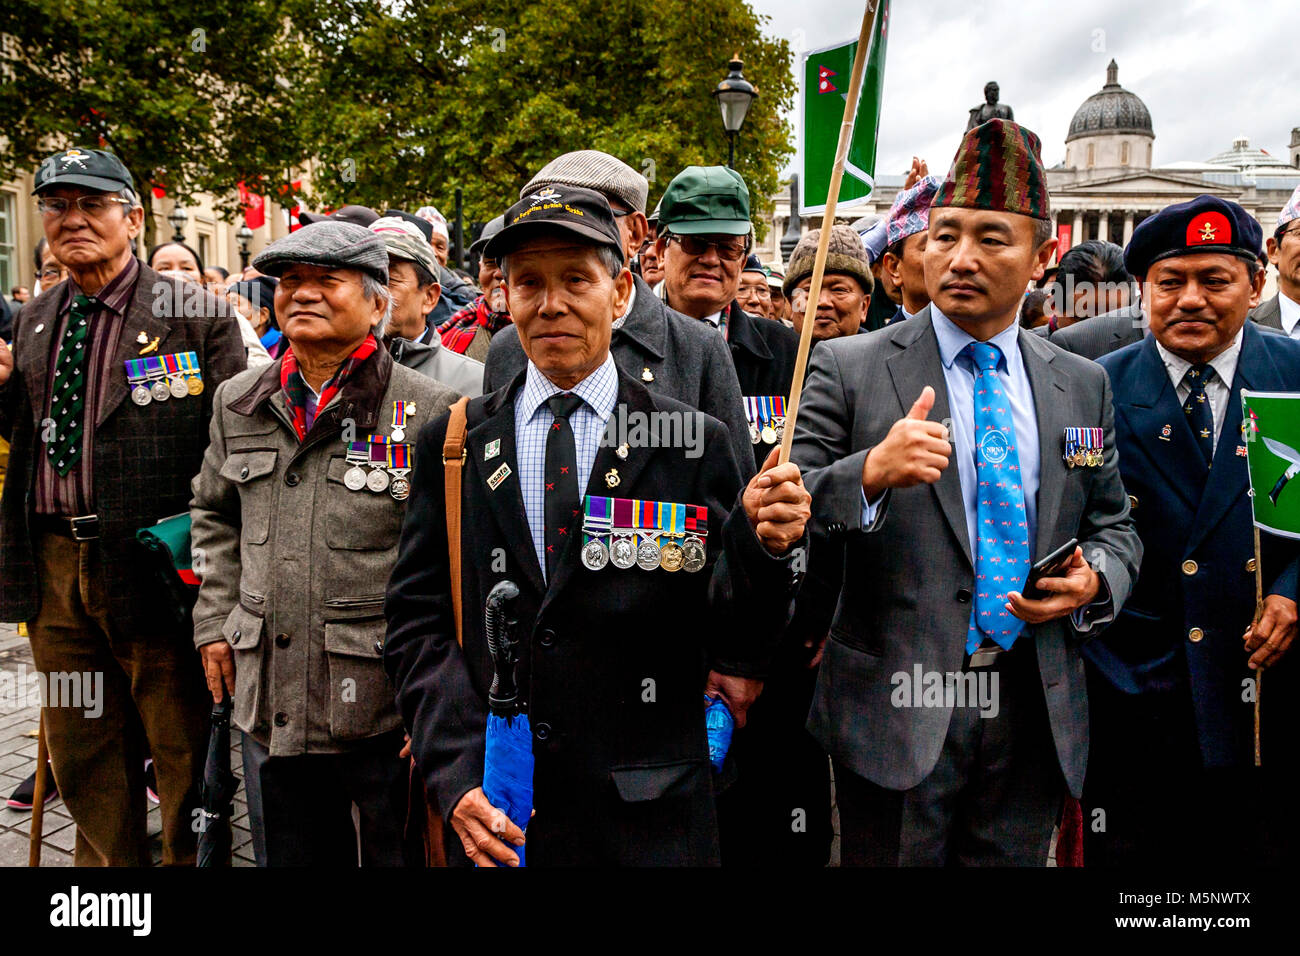 Former Ghurka soldiers stand in support of football fans from across the Uk who are marching against extremism under the banner of the FLA, London, UK Stock Photo